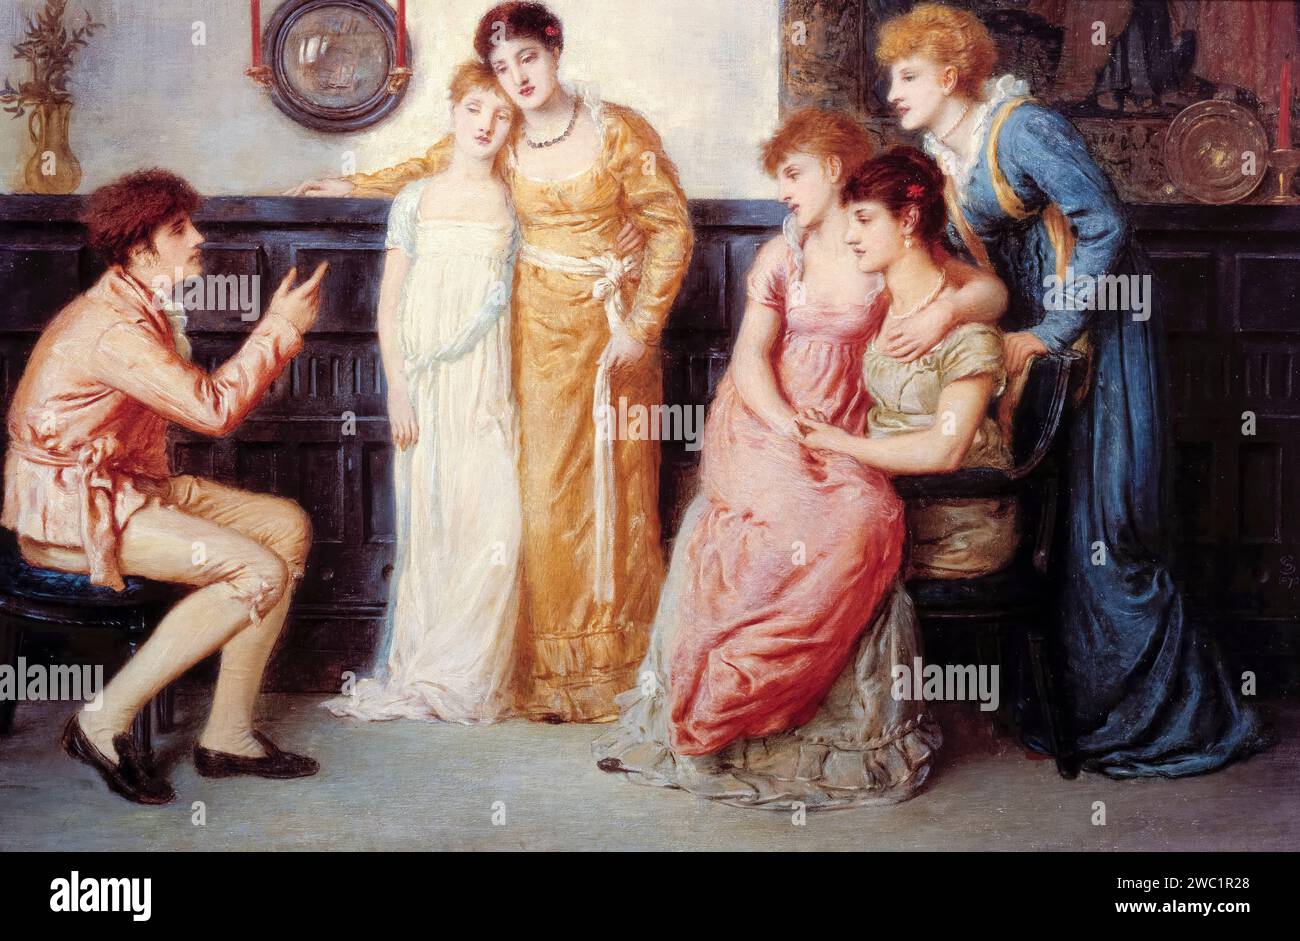 Simeon Solomon, A Youth Relating Tales to Ladies, painting in oil on canvas, 1870 Stock Photo